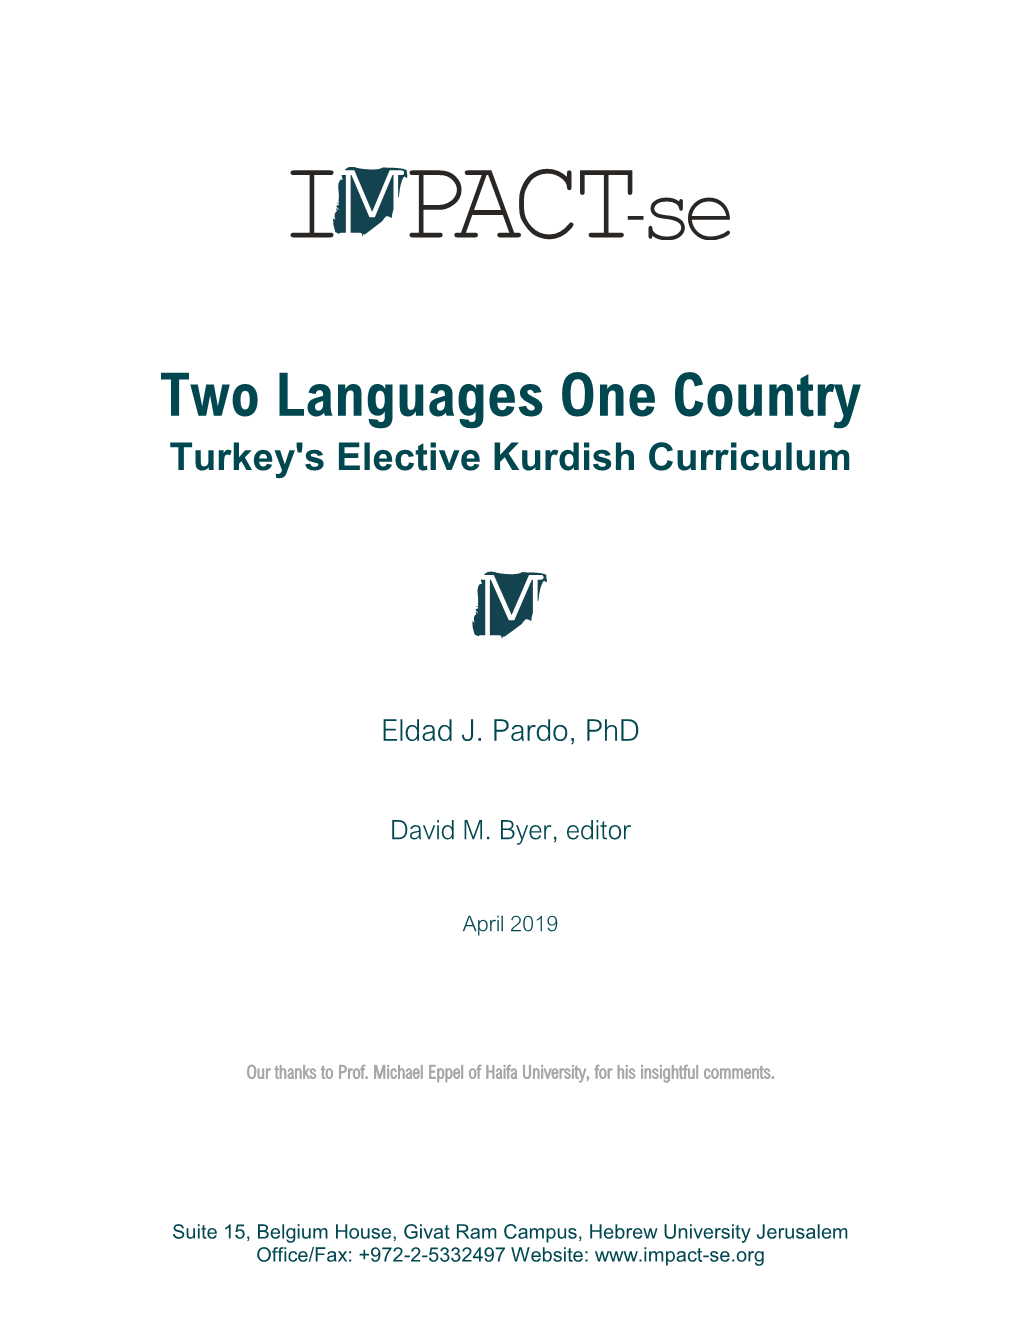 TWO LANGUAGES ONE COUNTRY: Turkey's Elective